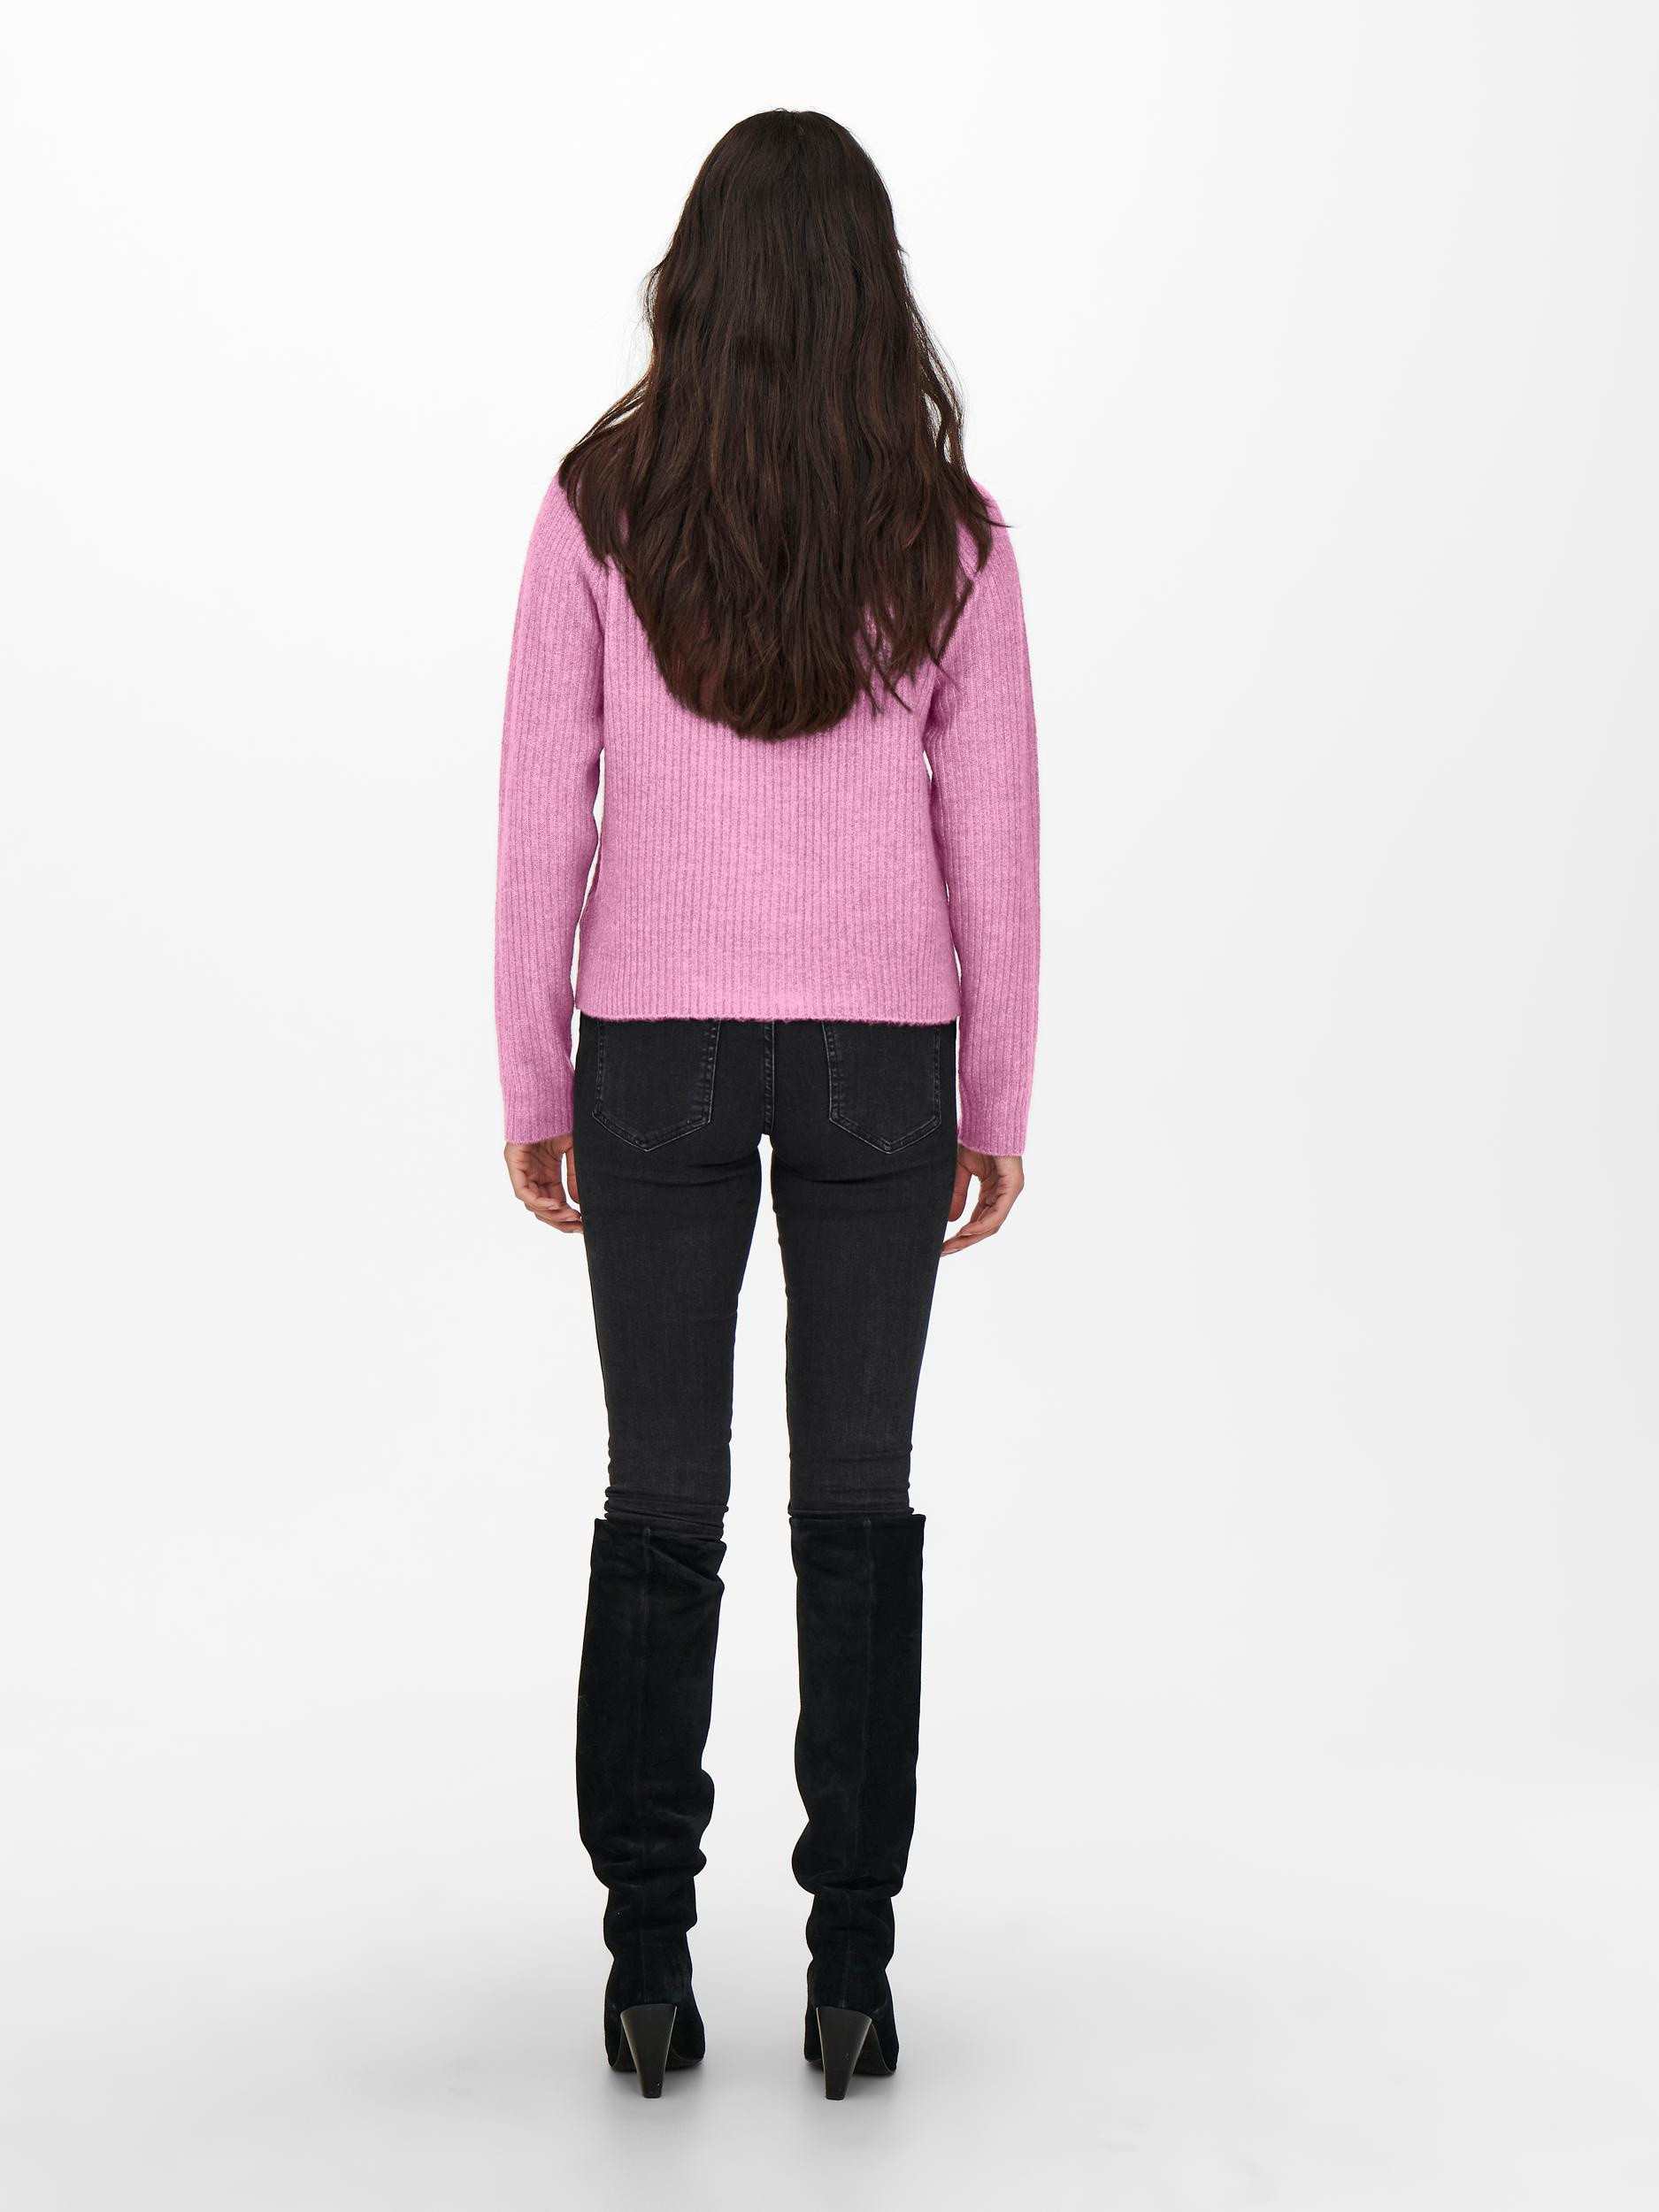 Only - Cardigan in maglia, Rosa fenicottero, large image number 3